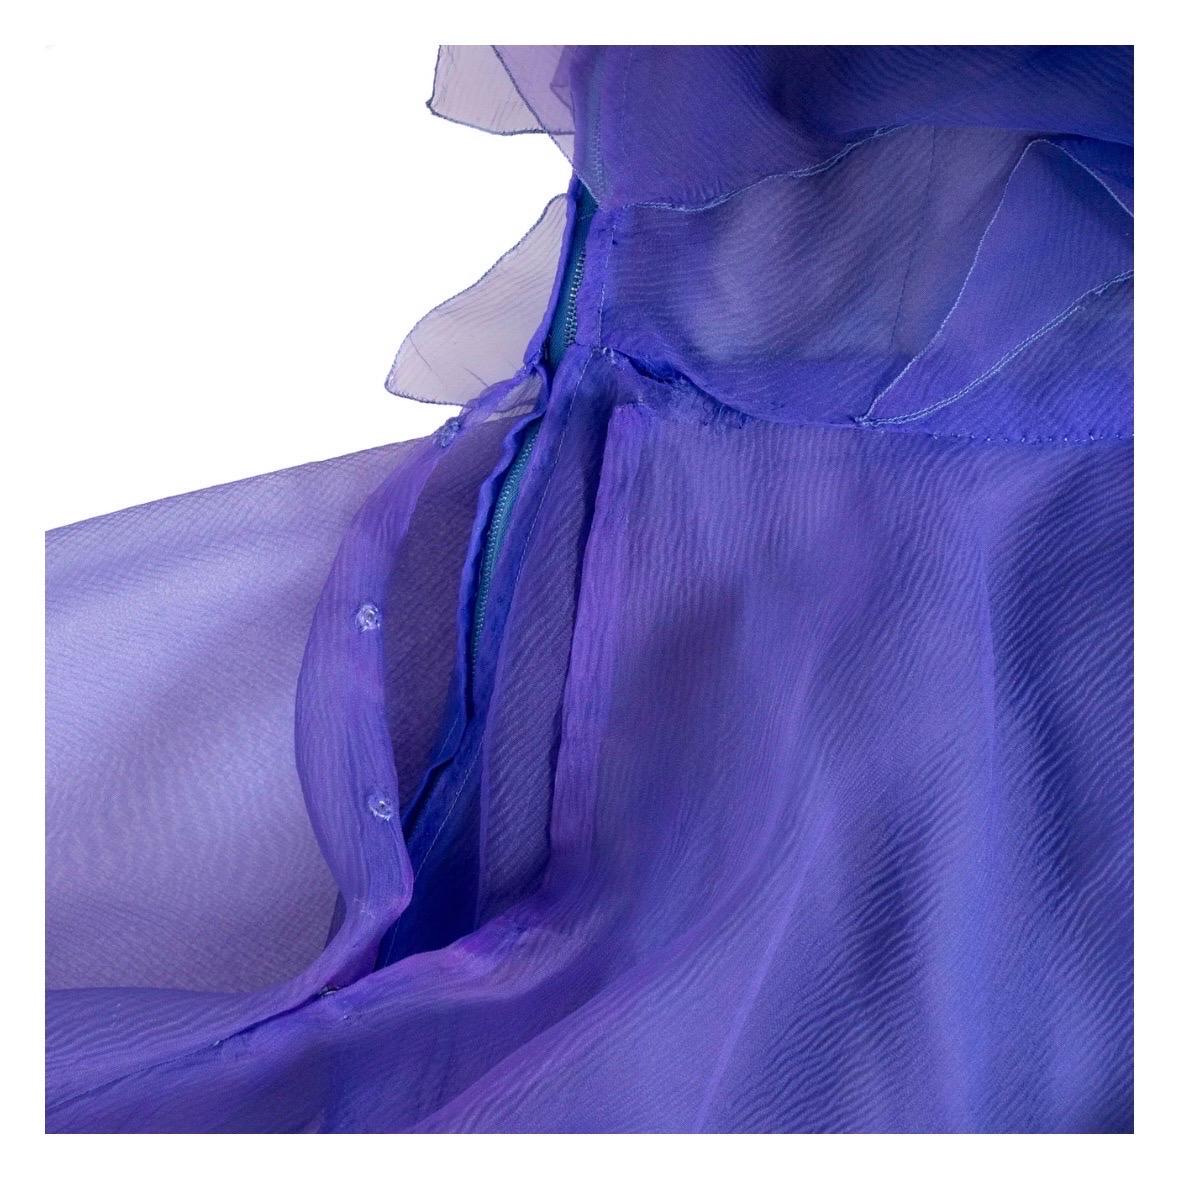 Christian Dior Haute Couture Silk Organza AW 1972 Gown For Sale 2